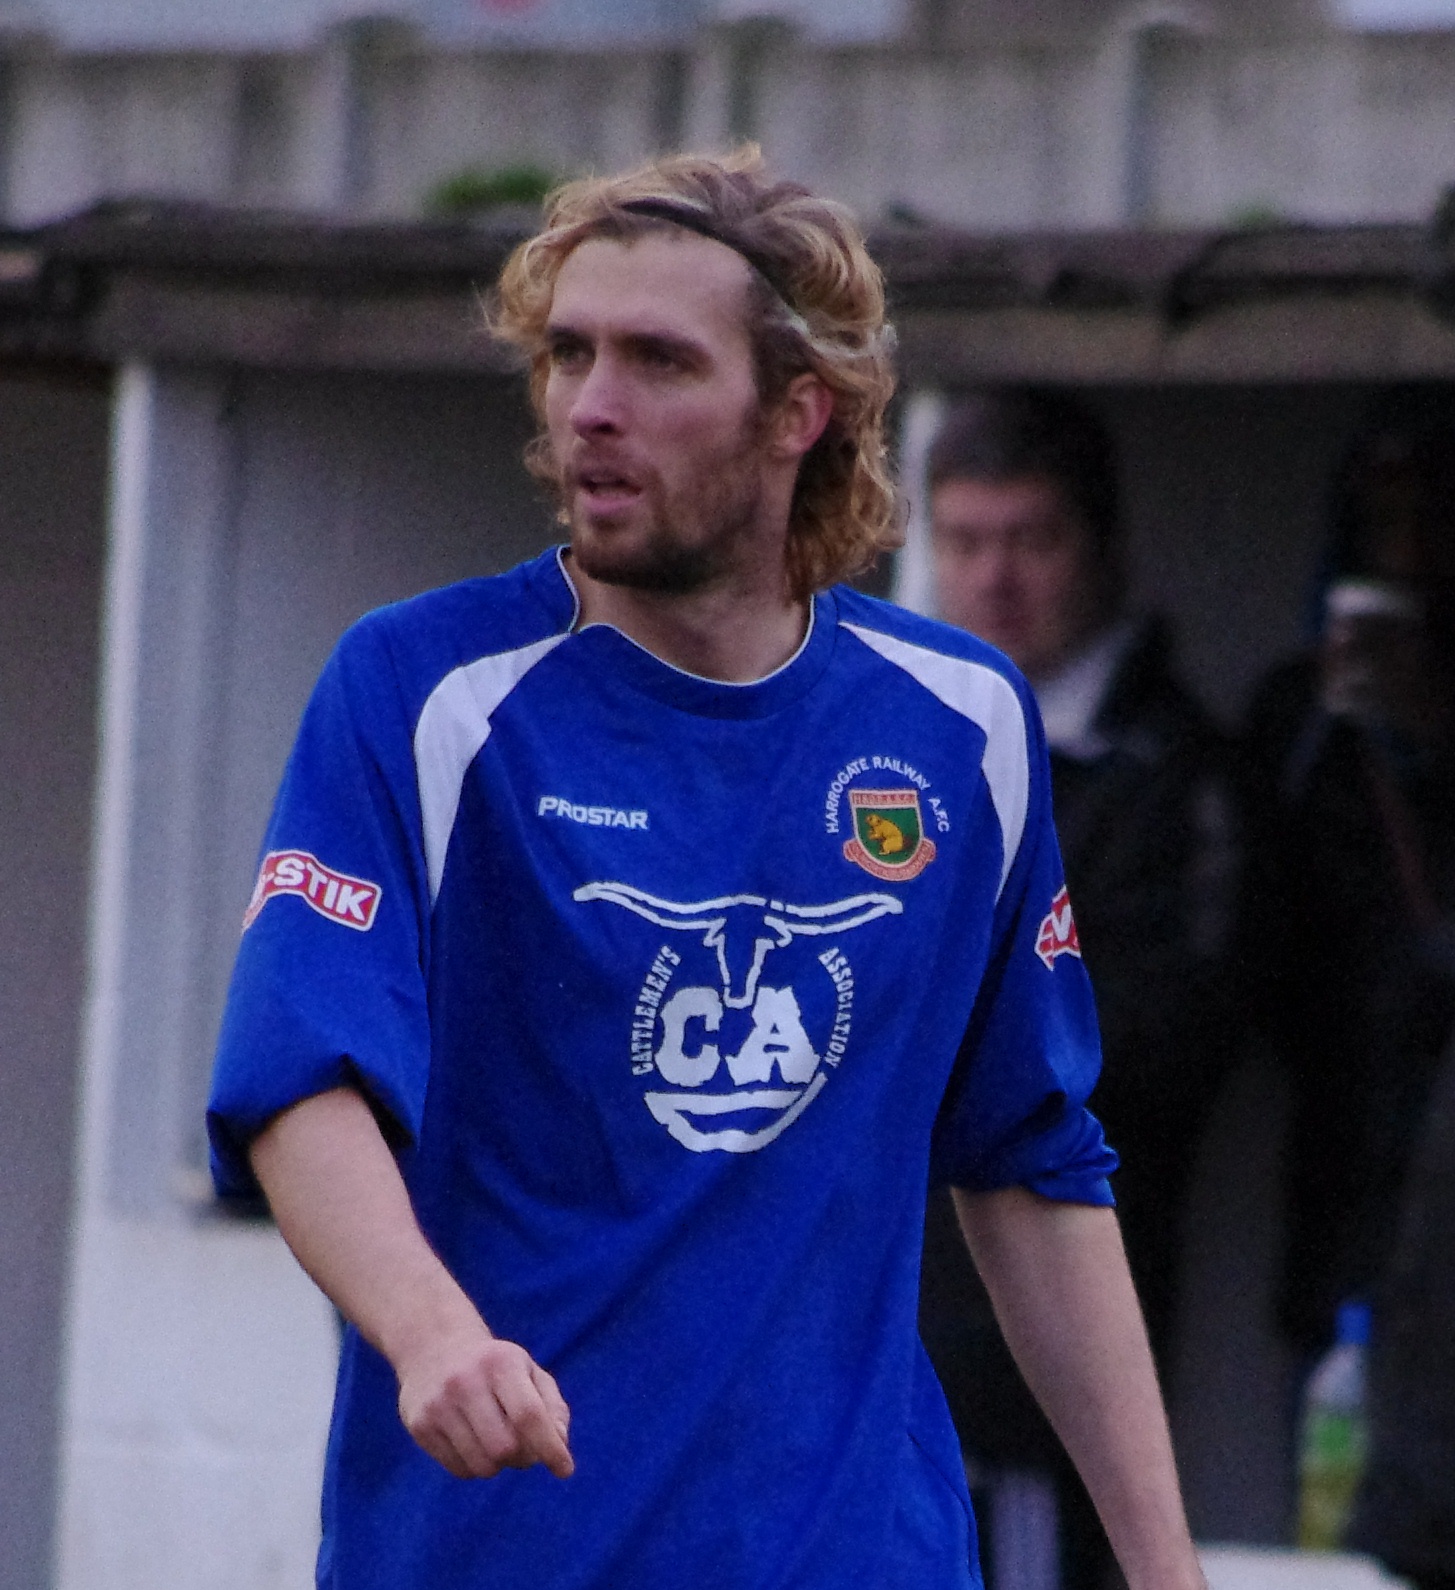 Robbie Youhill had given Harrogate a fifth-minute lead